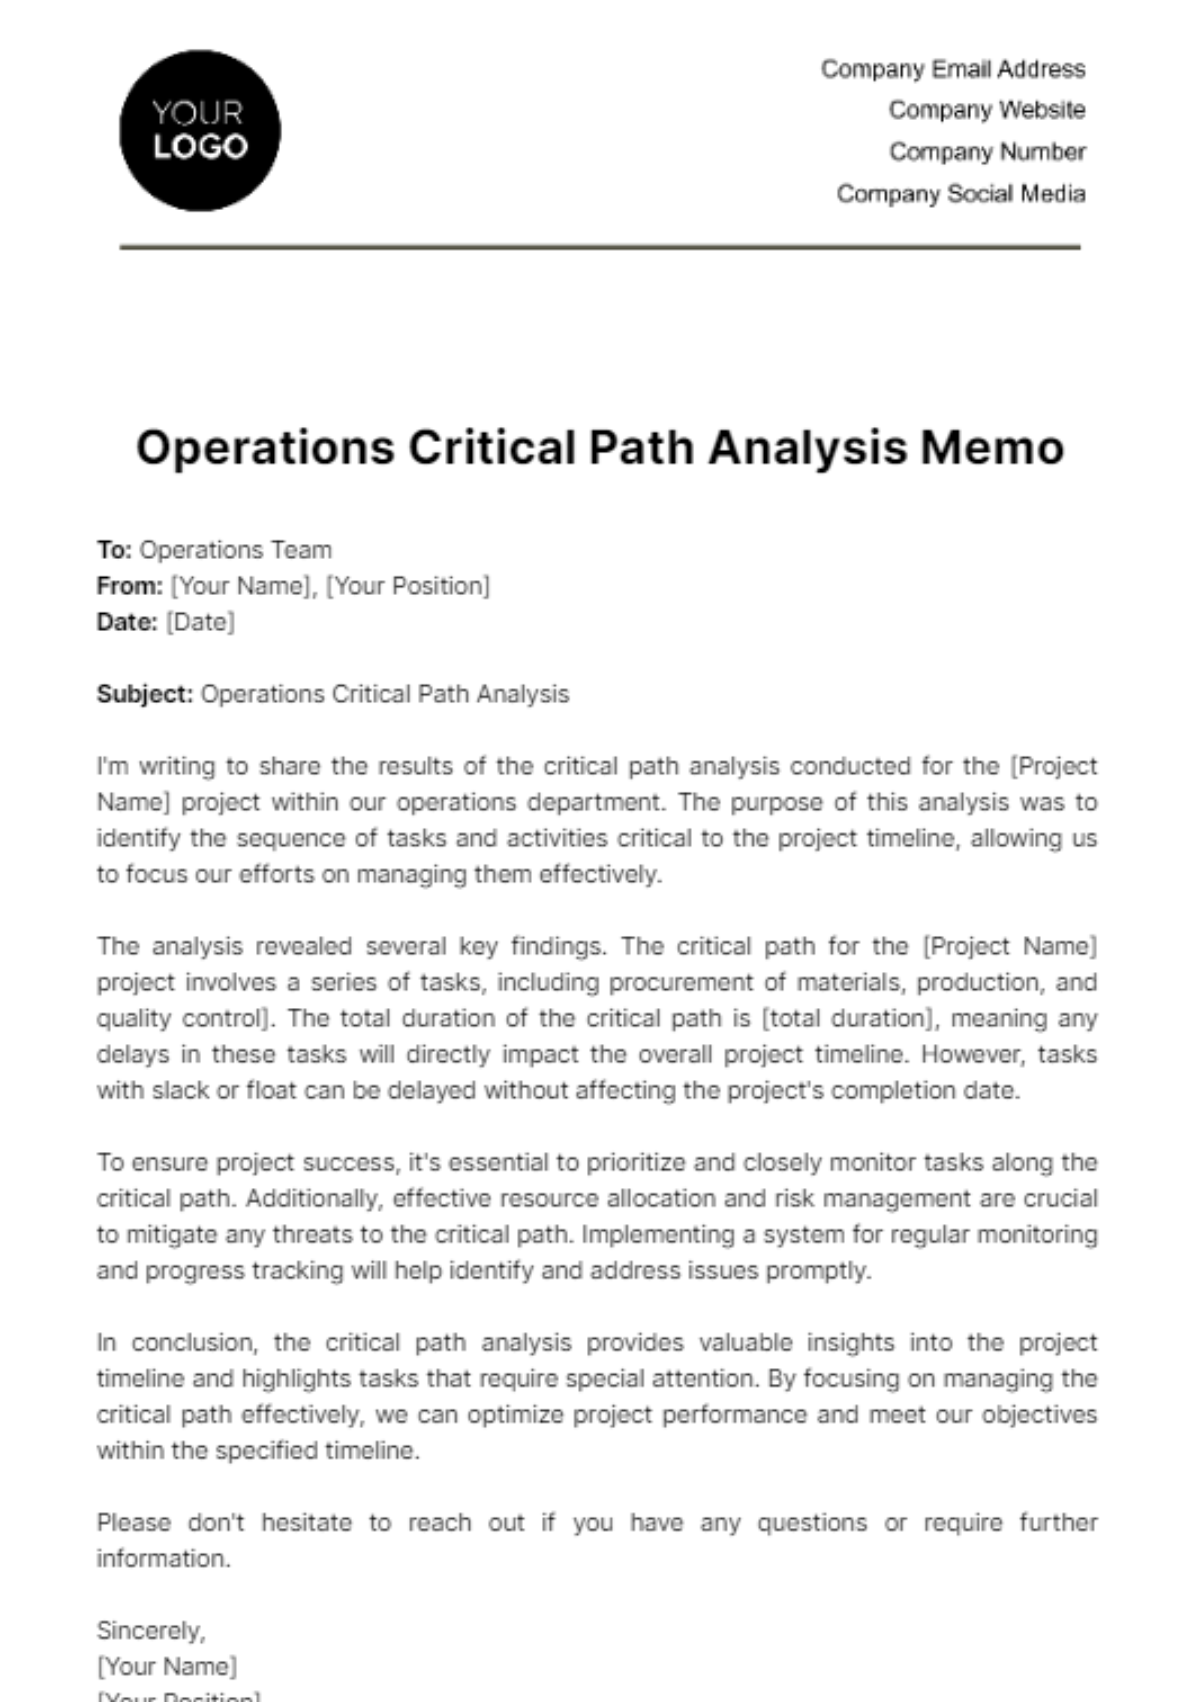 Operations Critical Path Analysis Memo Template